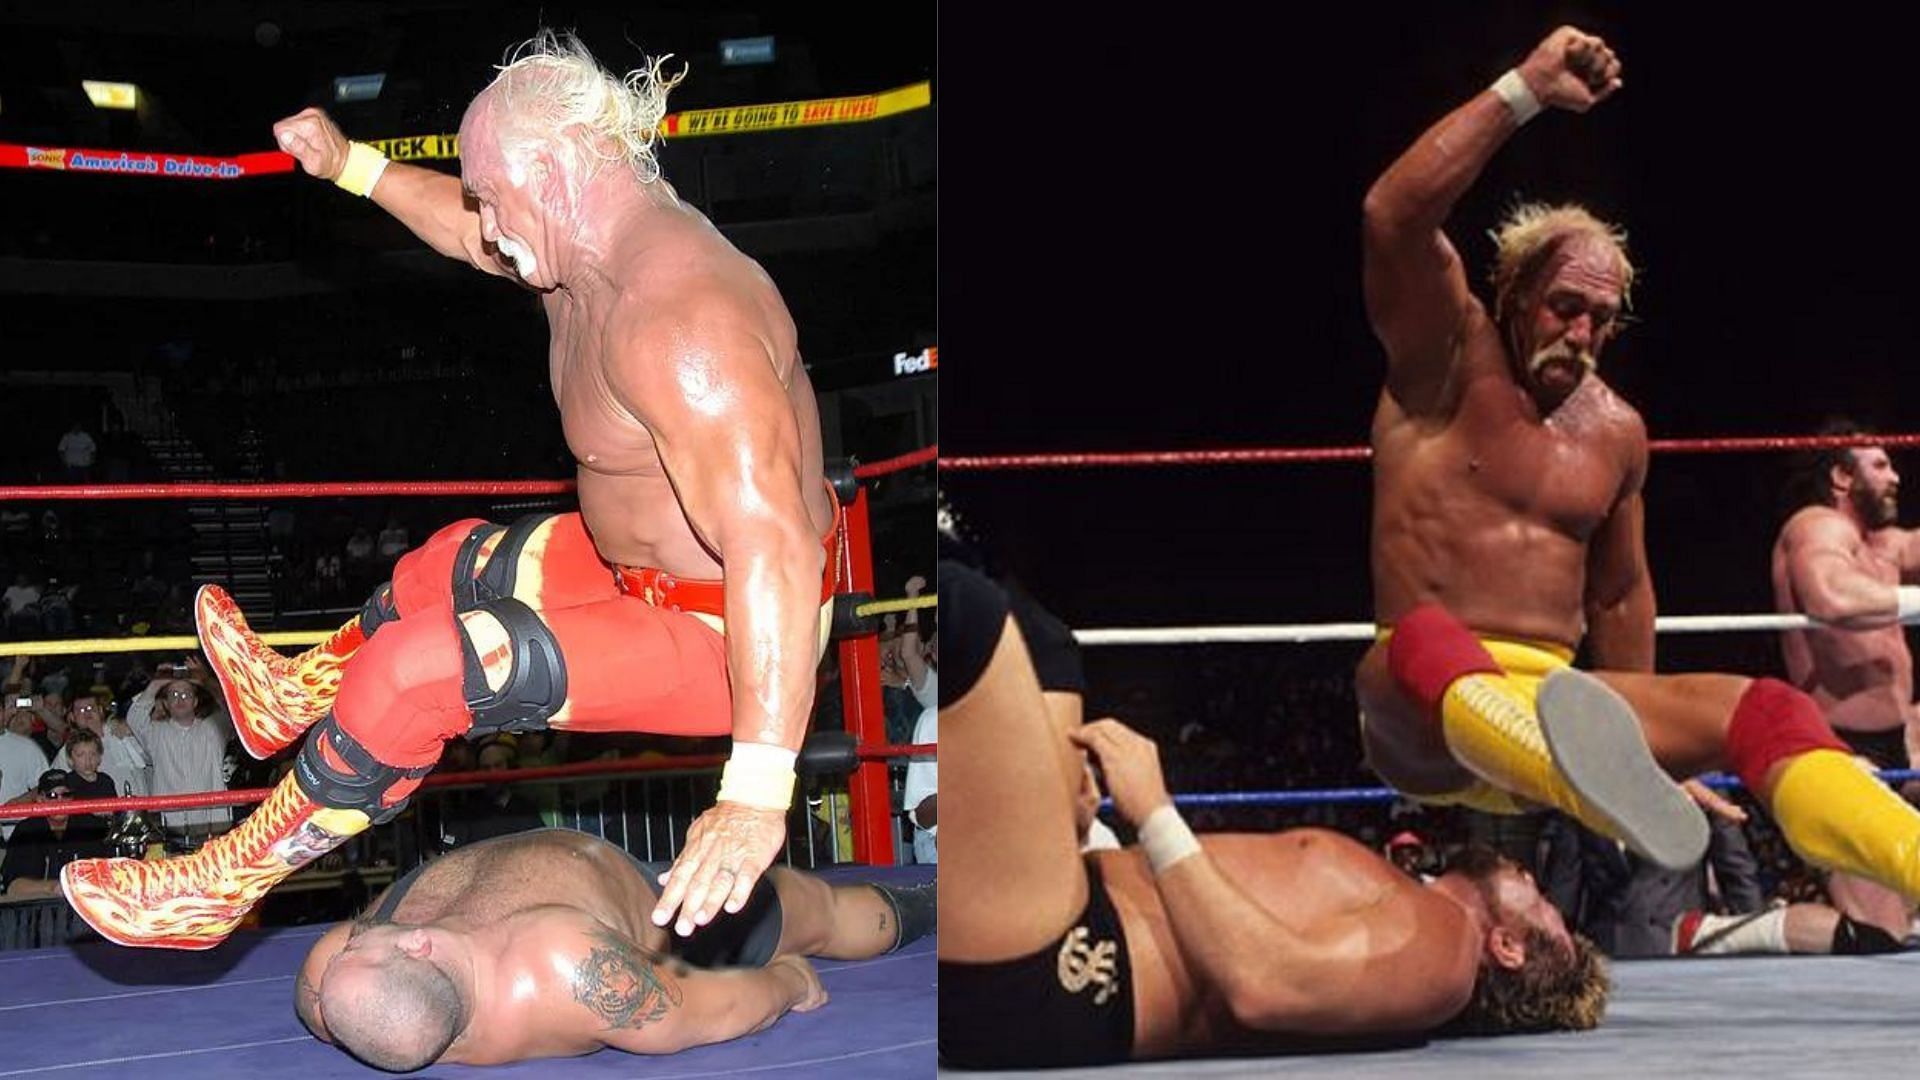 Hogan mainly used his legs for his wrestling finisher, leg drop